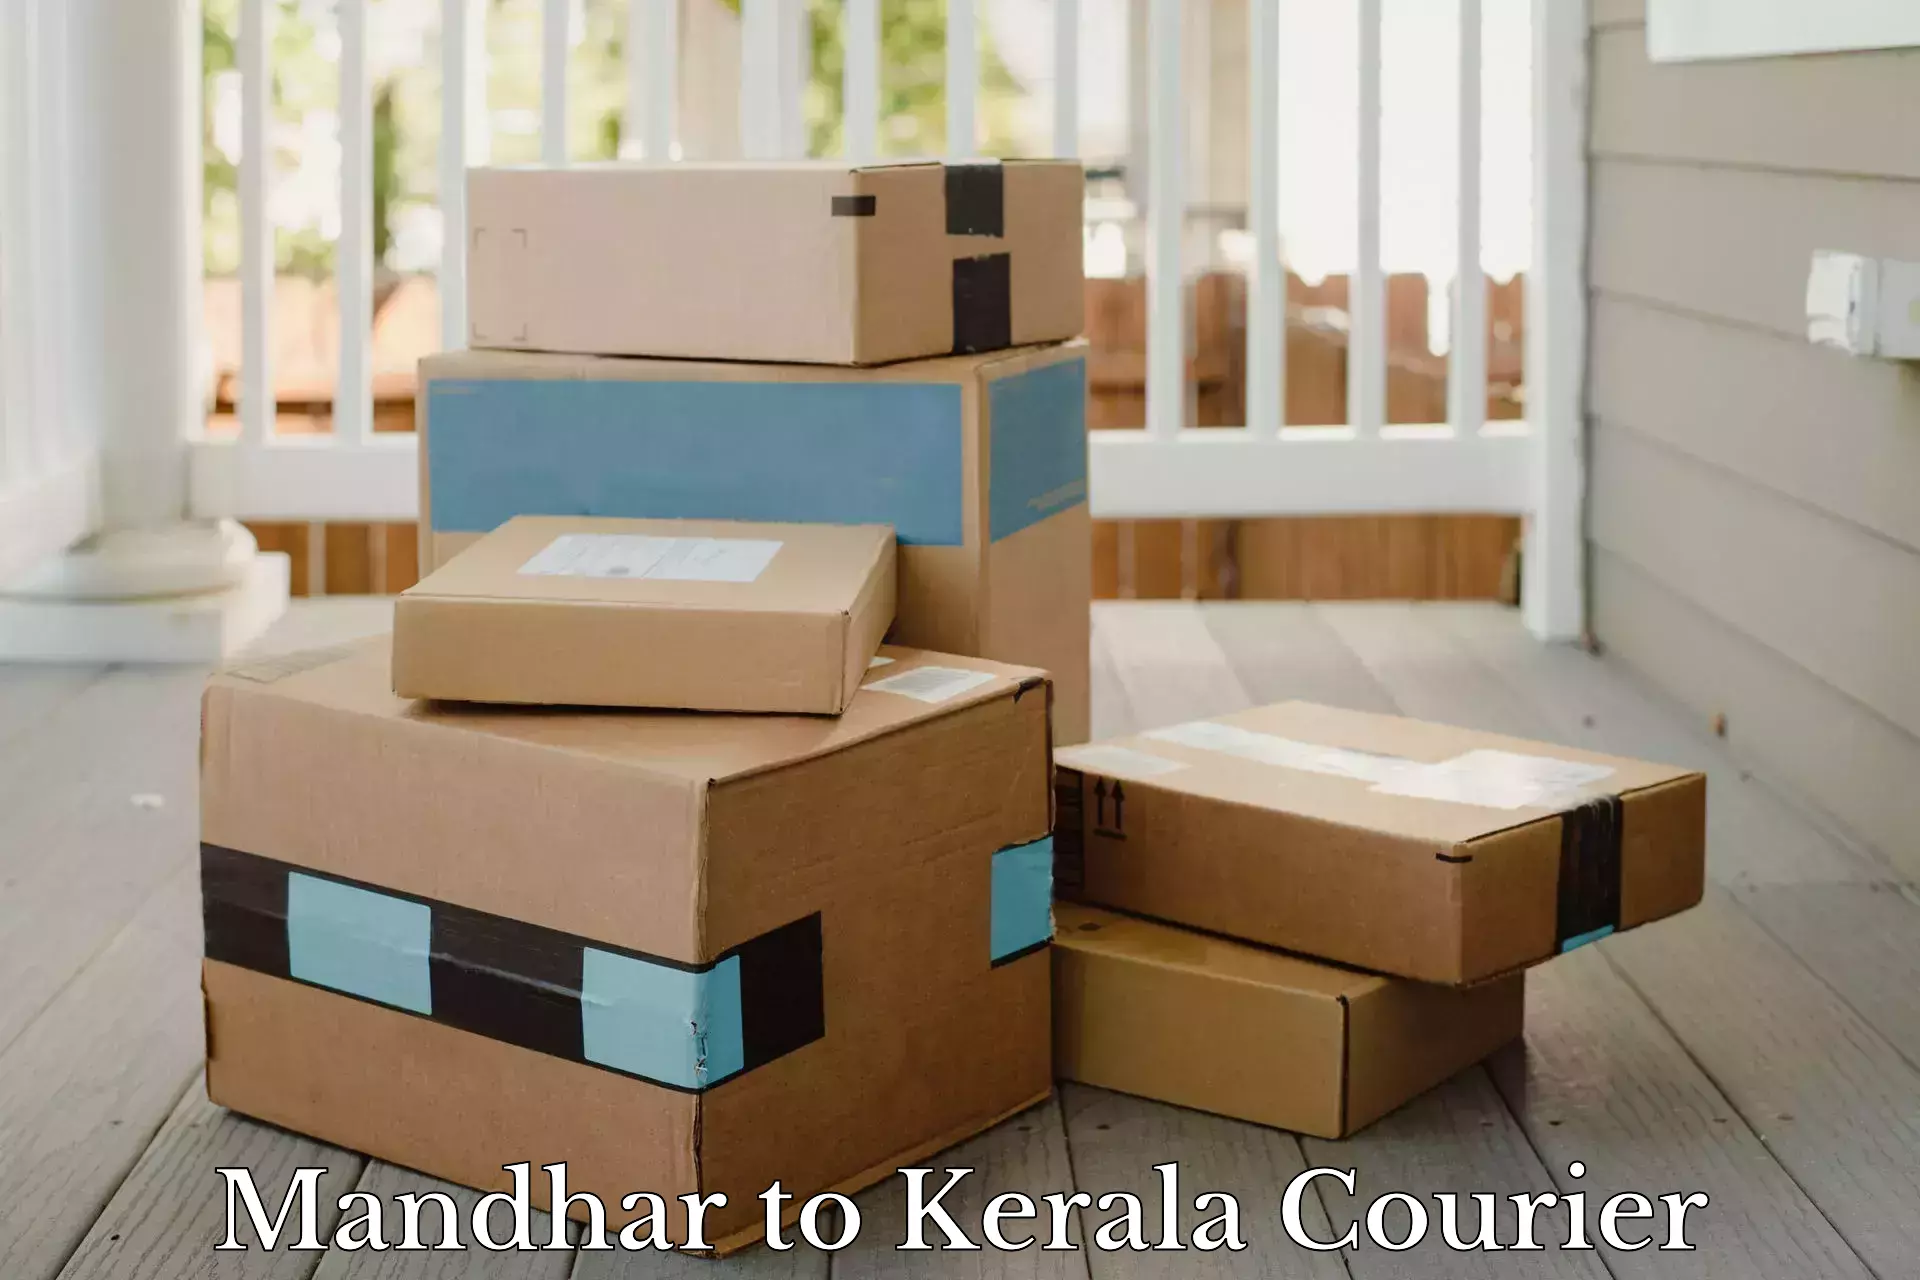 Reliable delivery network Mandhar to Kerala